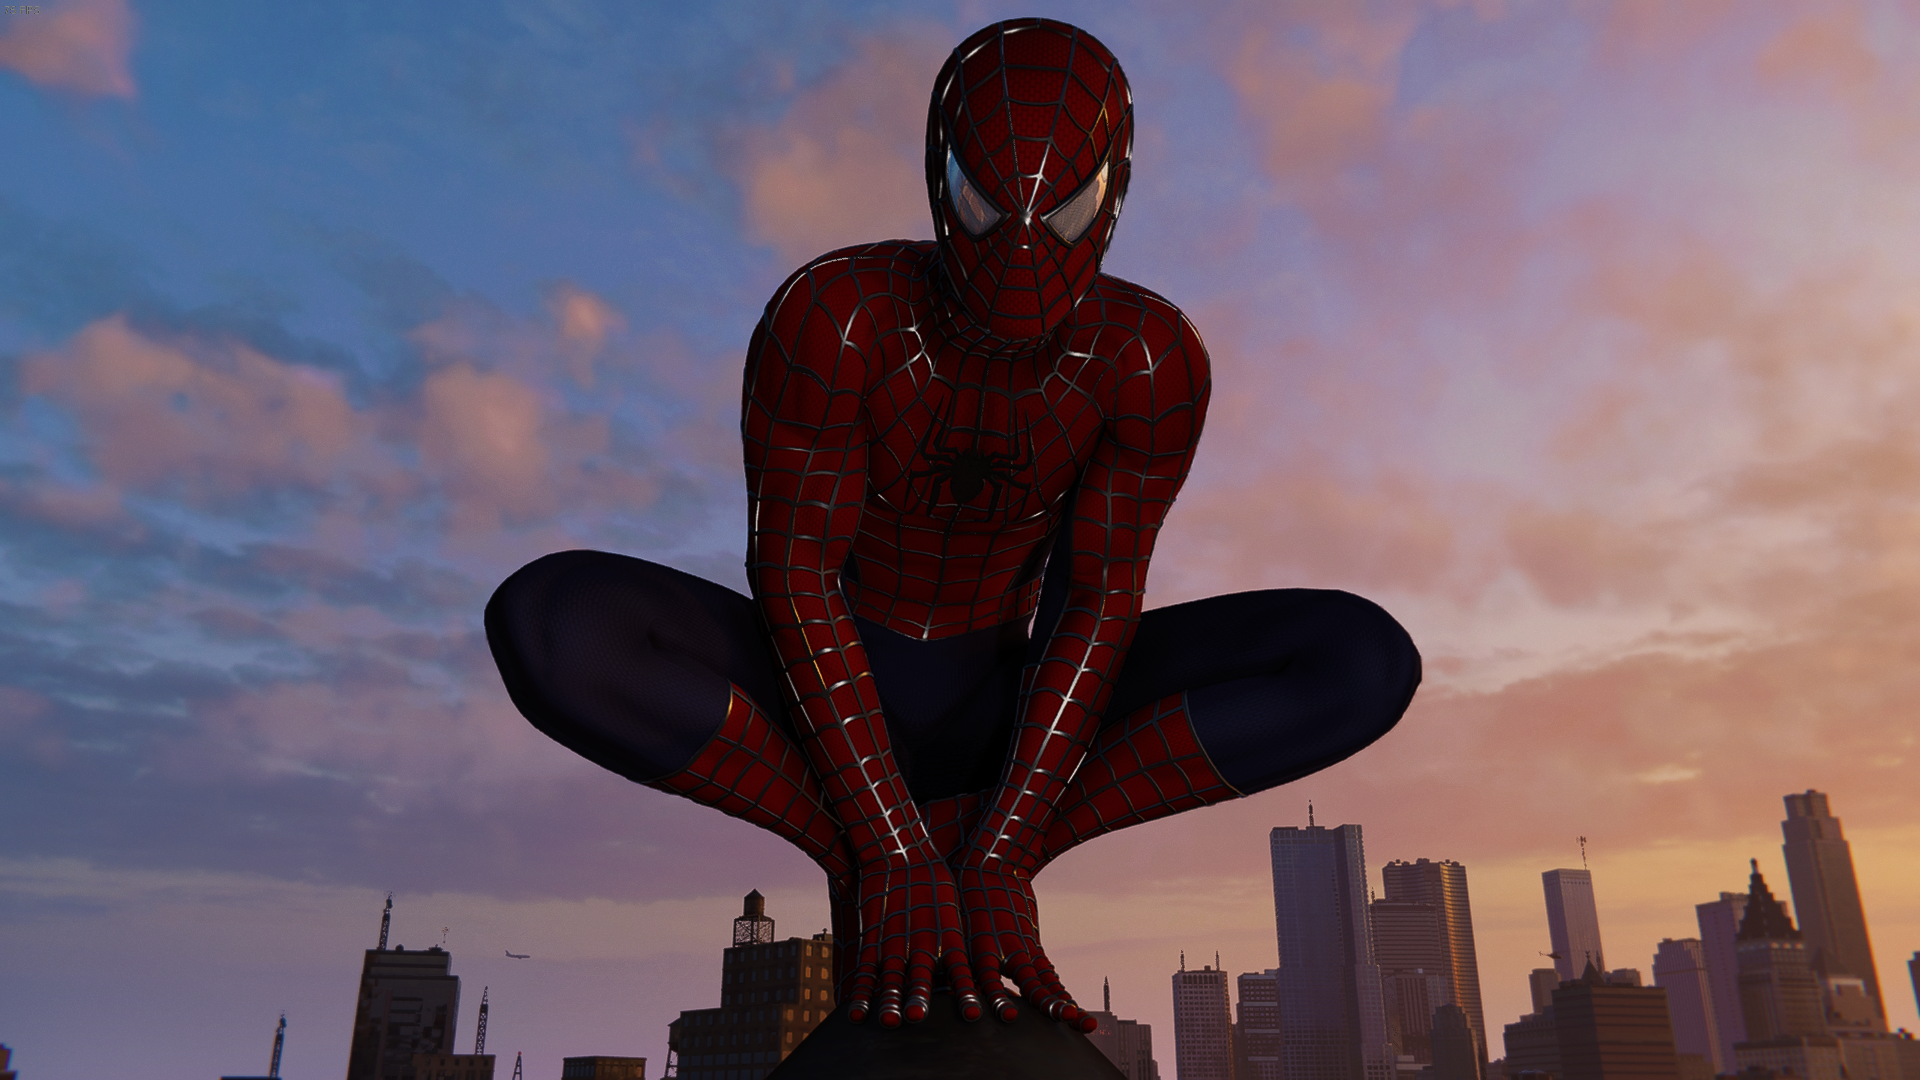 Spider Man Spider Man 2018 PlayStation Marvel Comics Bodysuit Looking At Viewer Sky Clouds City Buil 1920x1080